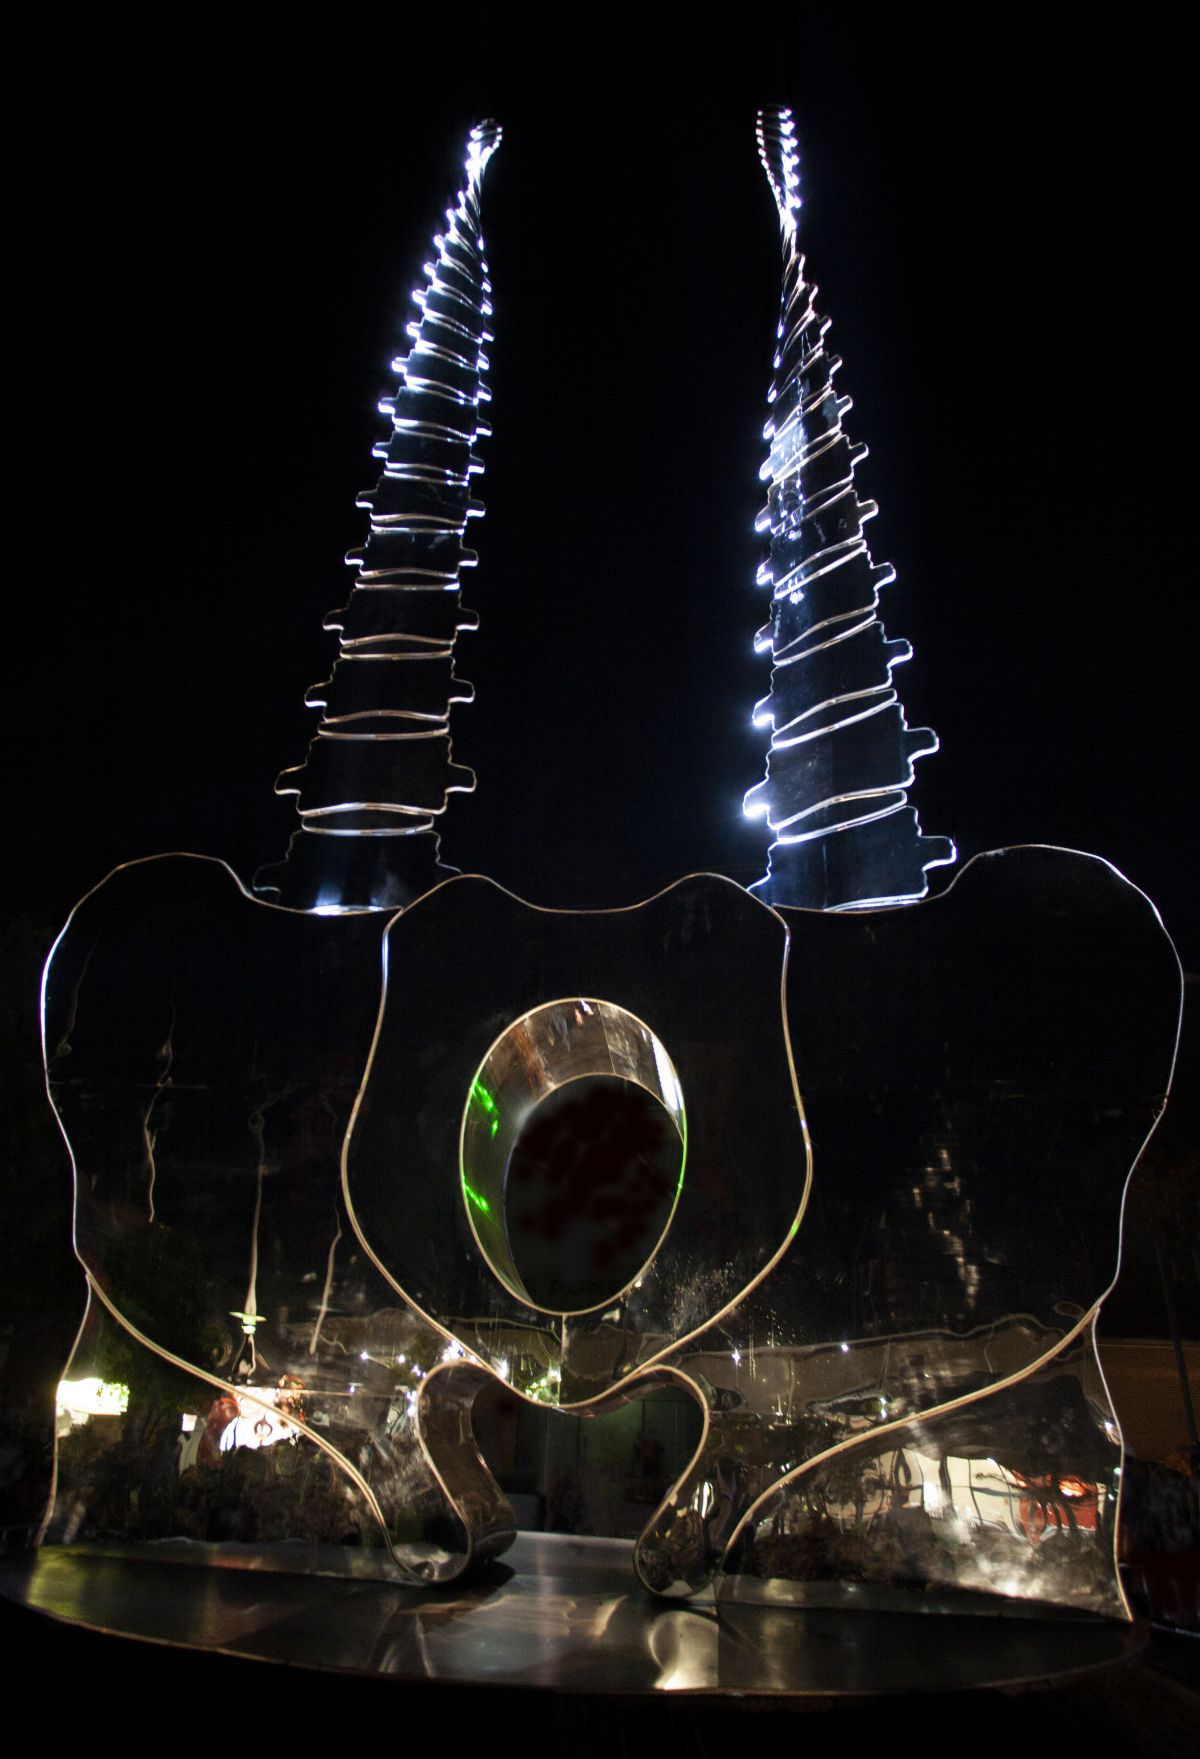 Mirrored sculpture lit up at night